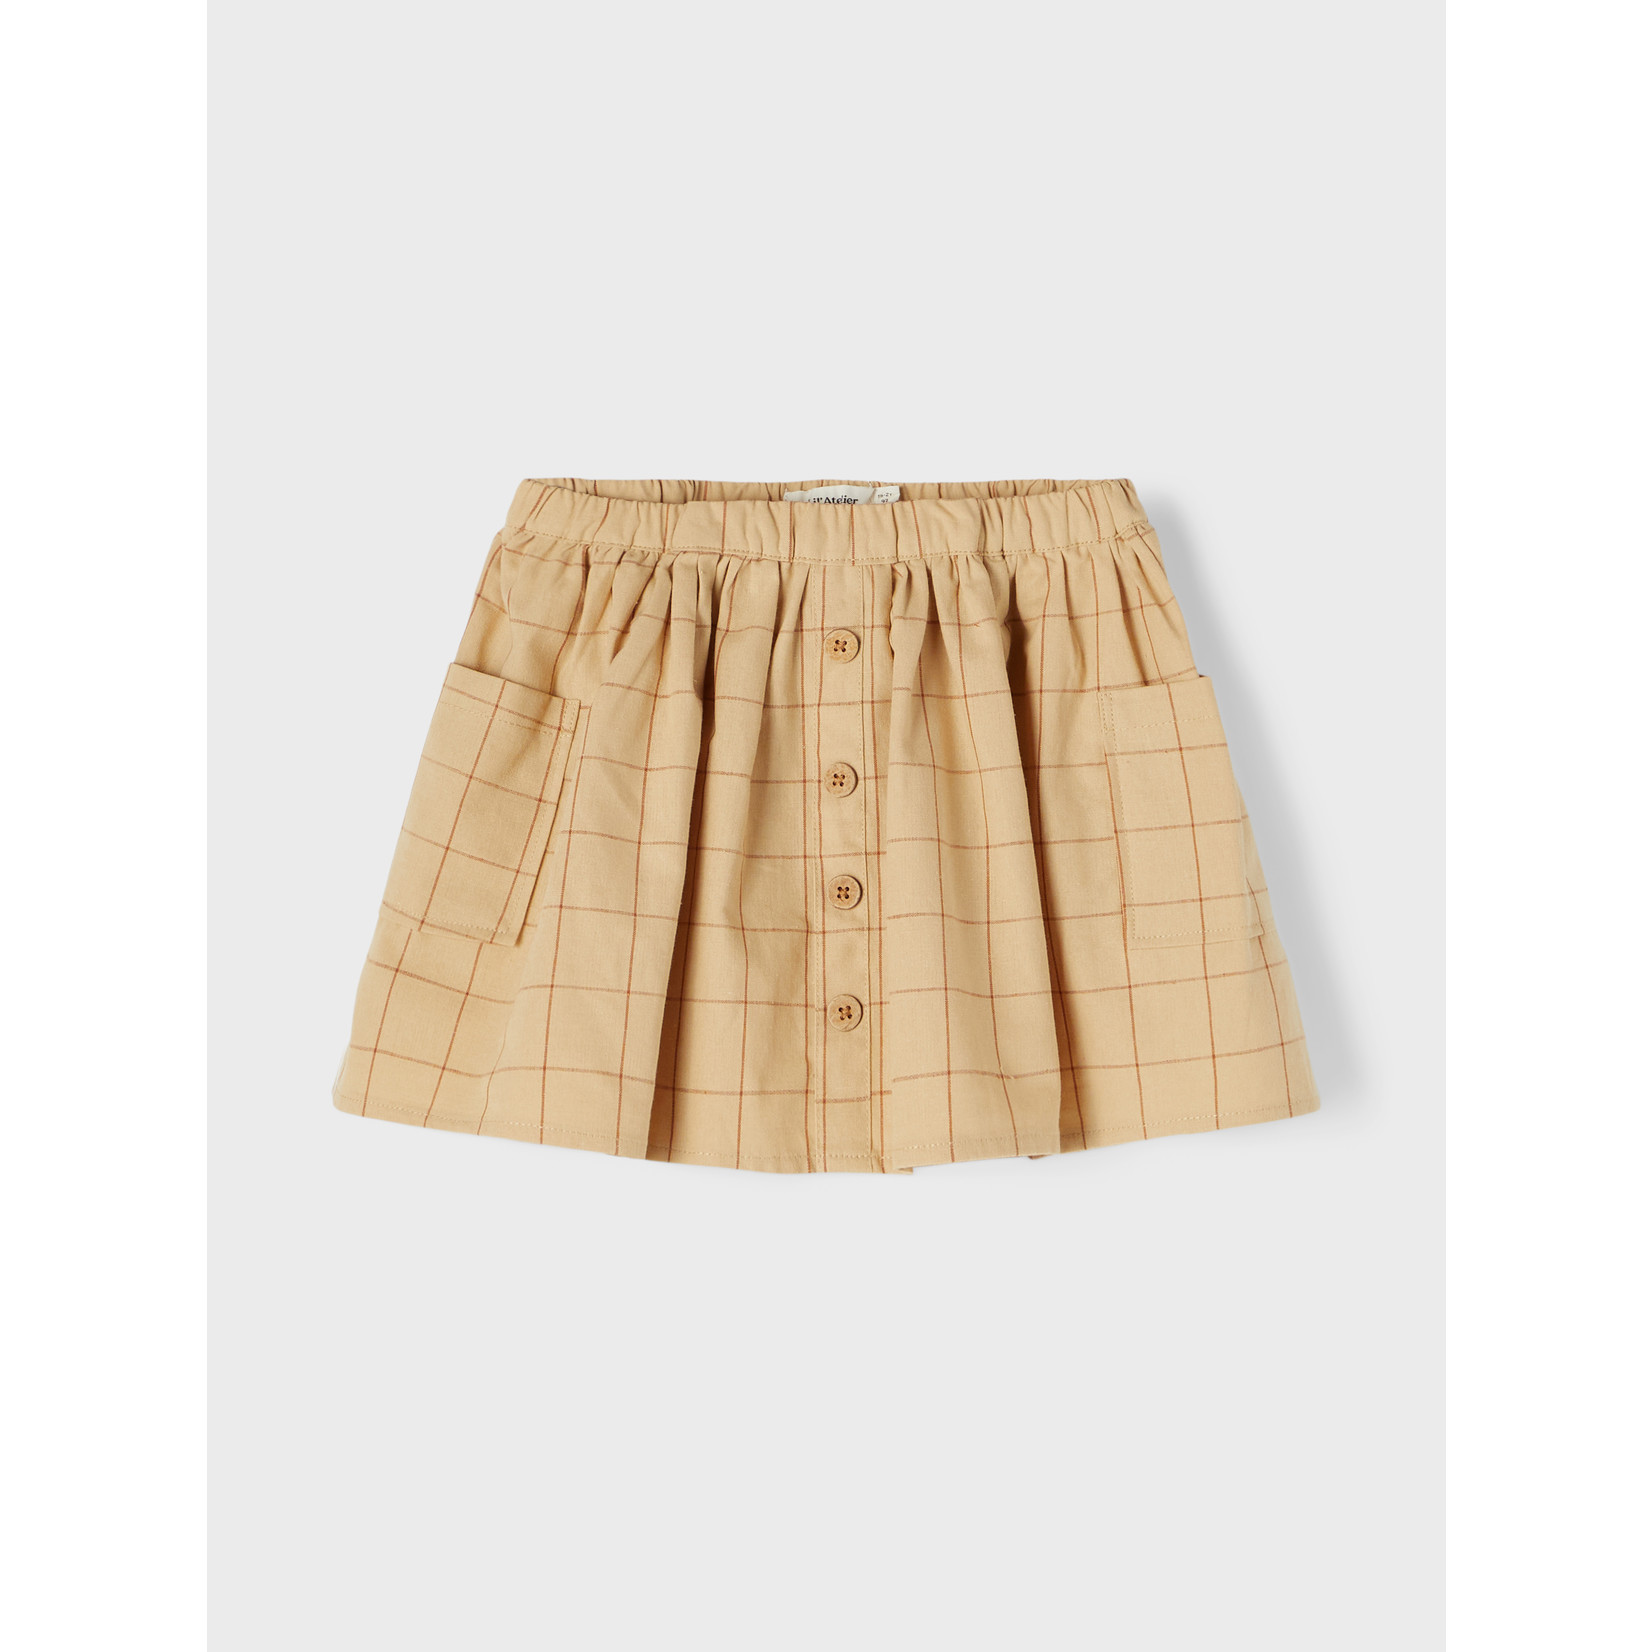 Lil Atelier Lil Atelier - NMFDUNNA LOOSE SKIRT LIL - Croissant